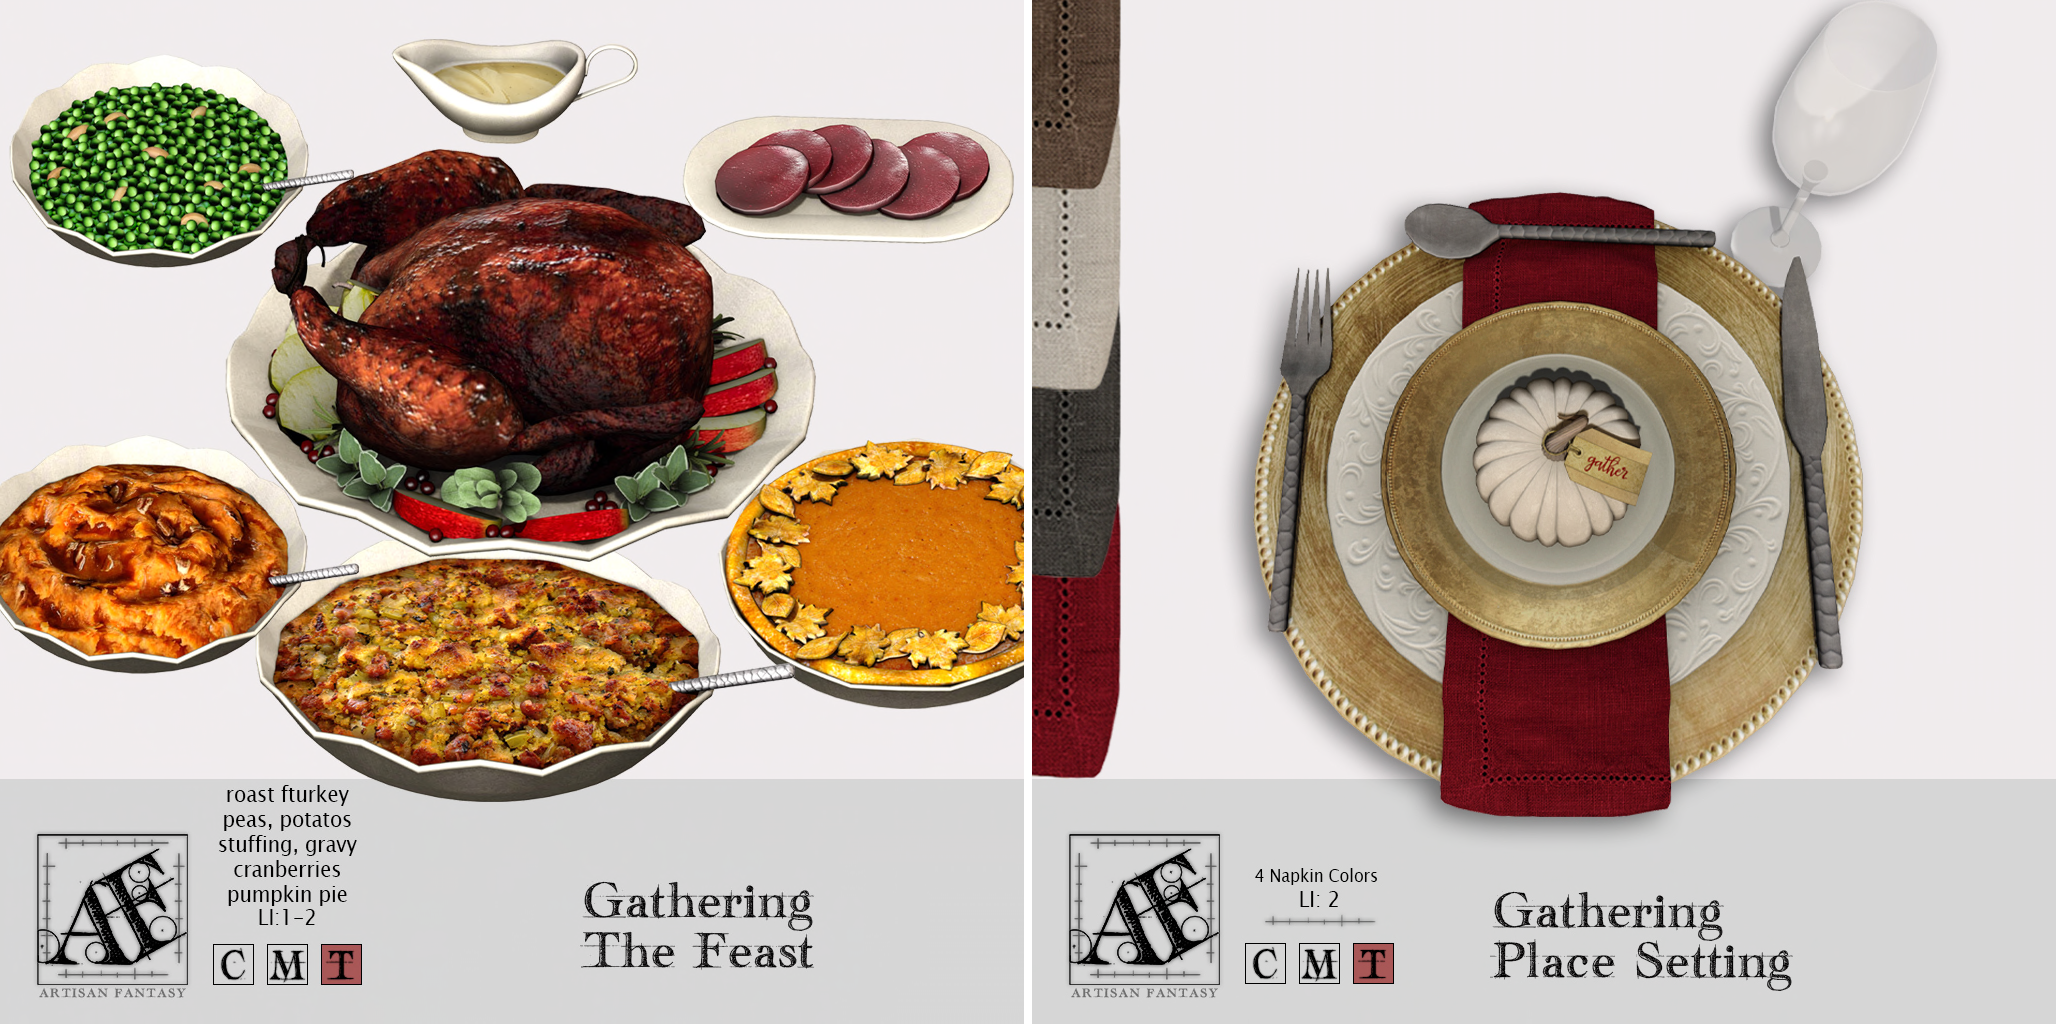 Artisan Fantasy – Gathering – The Feast & Place Setting